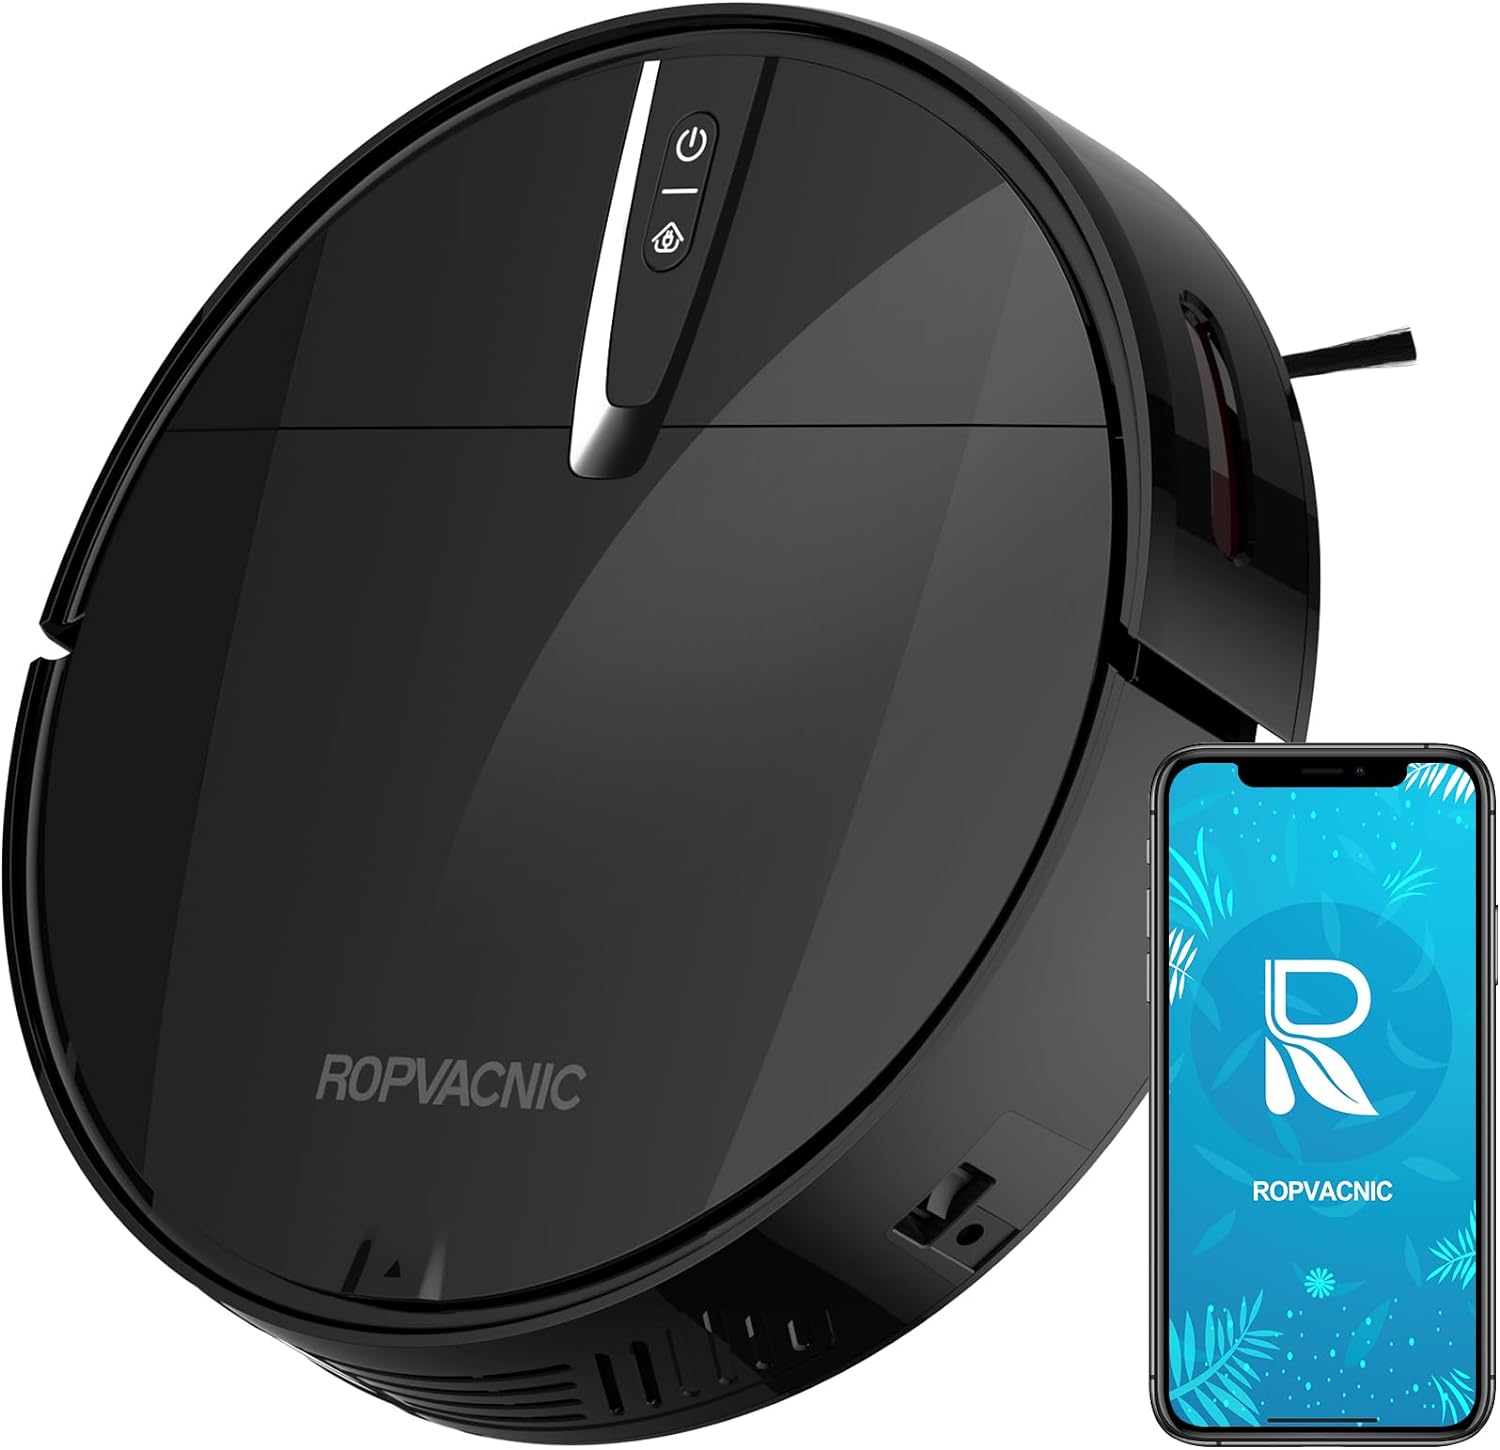 Ropvacnic Vacuum Cleaner Review